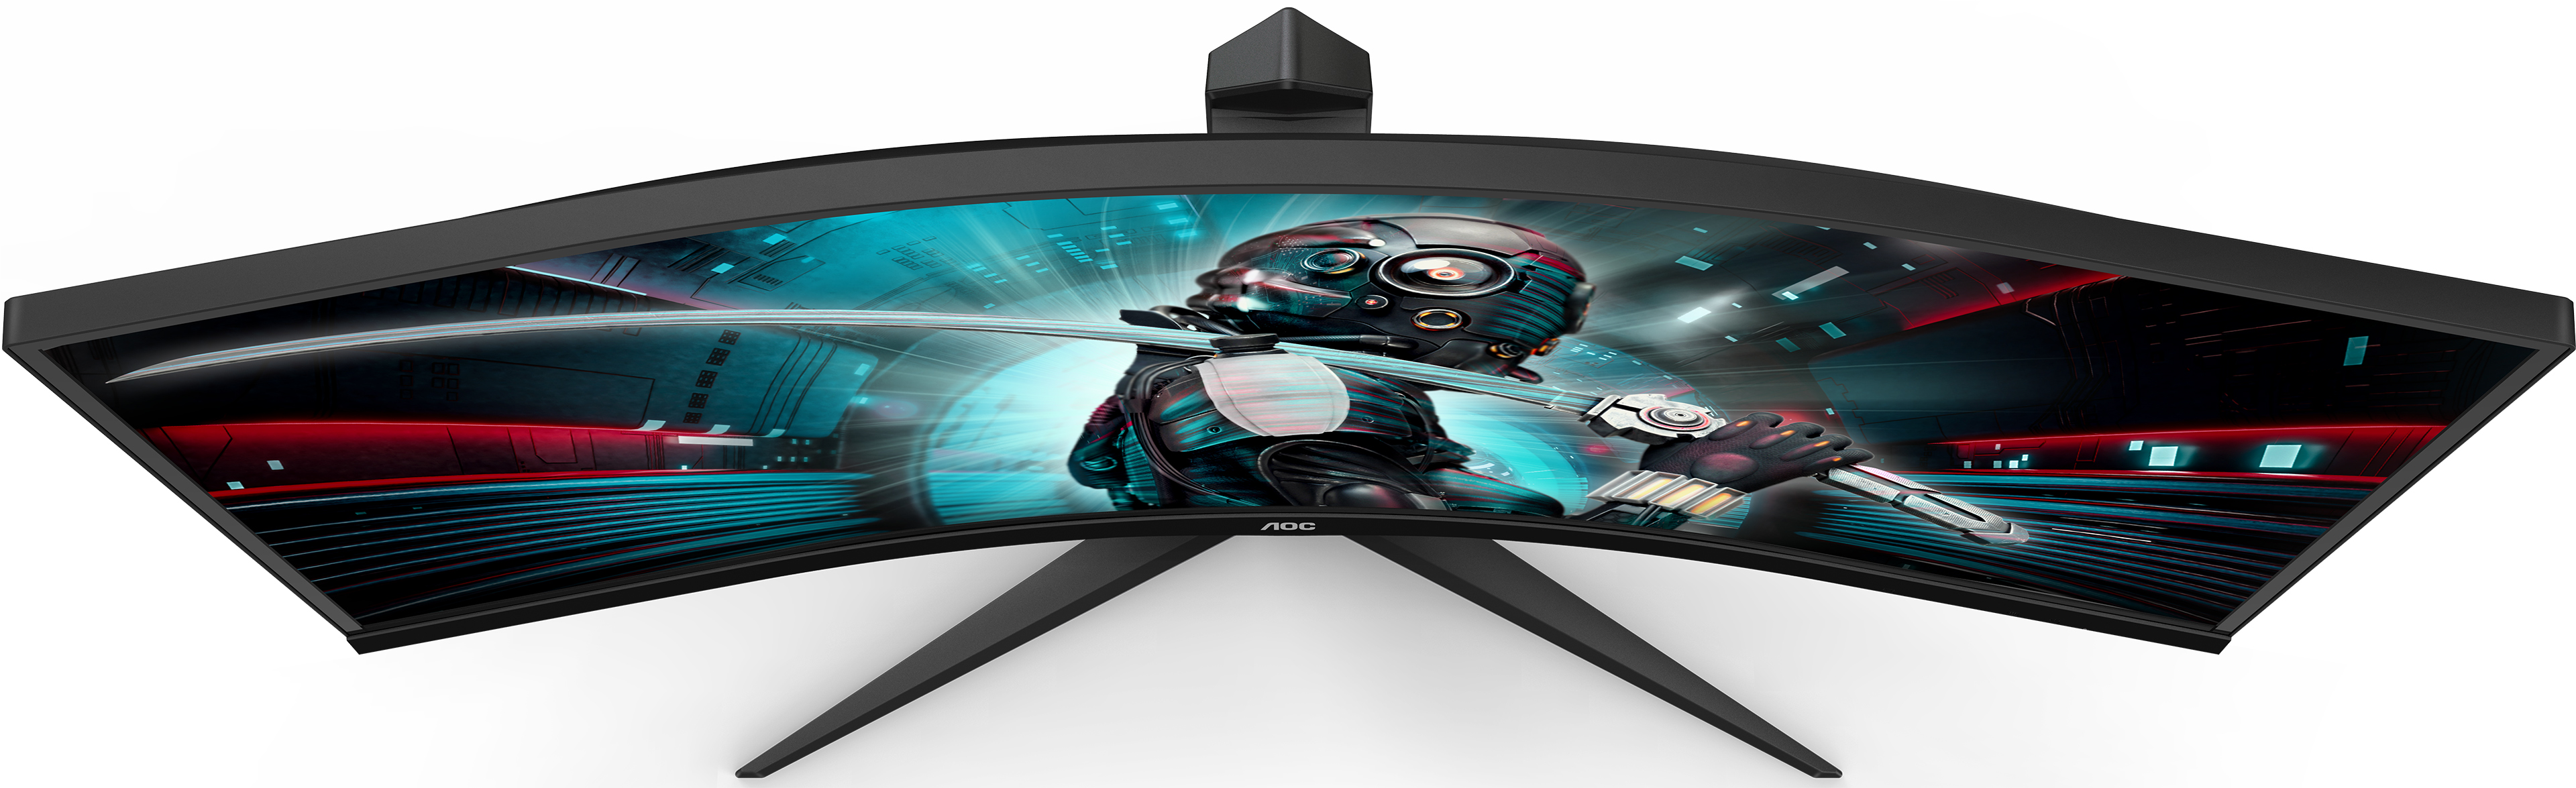 AOC Reveals Two 34-Inch Curved Gaming Monitors: Up to 144 Hz & FreeSync